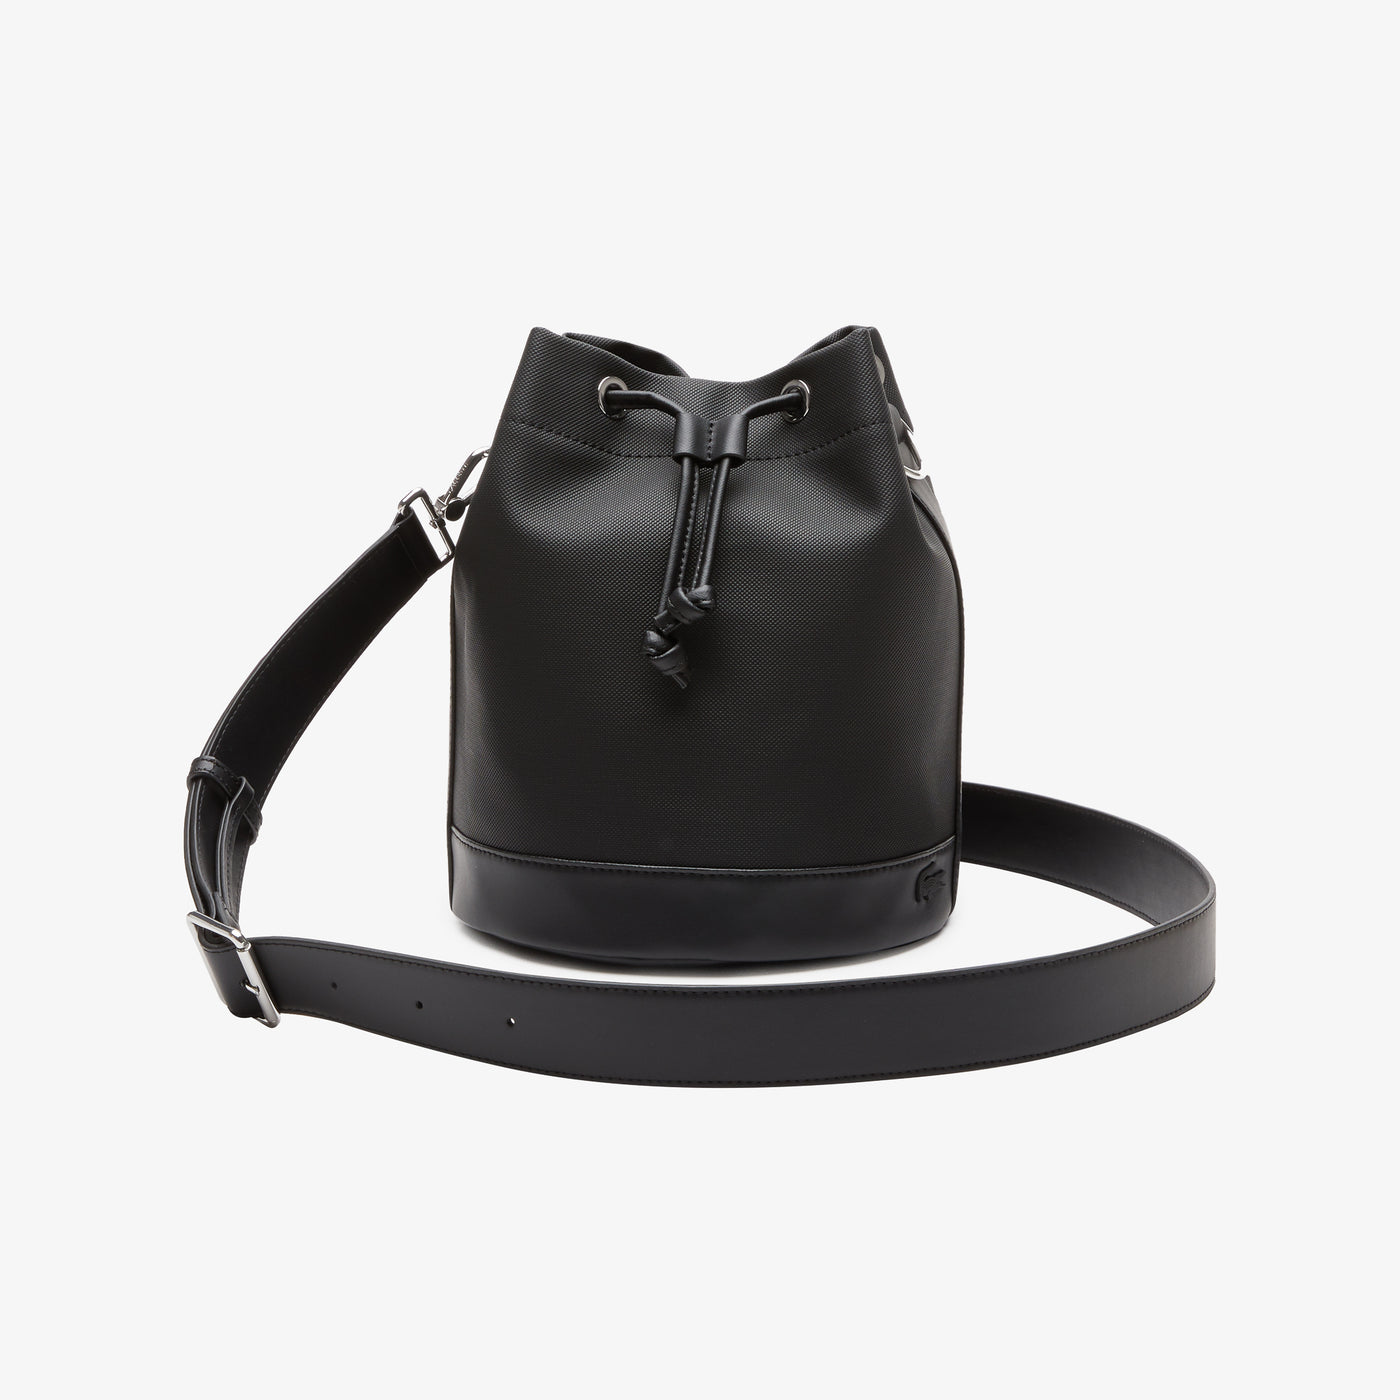 Shop The Latest Collection Of Lacoste Women'S Lacoste Detachable Strap Bucket Bag - Nf3945Db In Lebanon